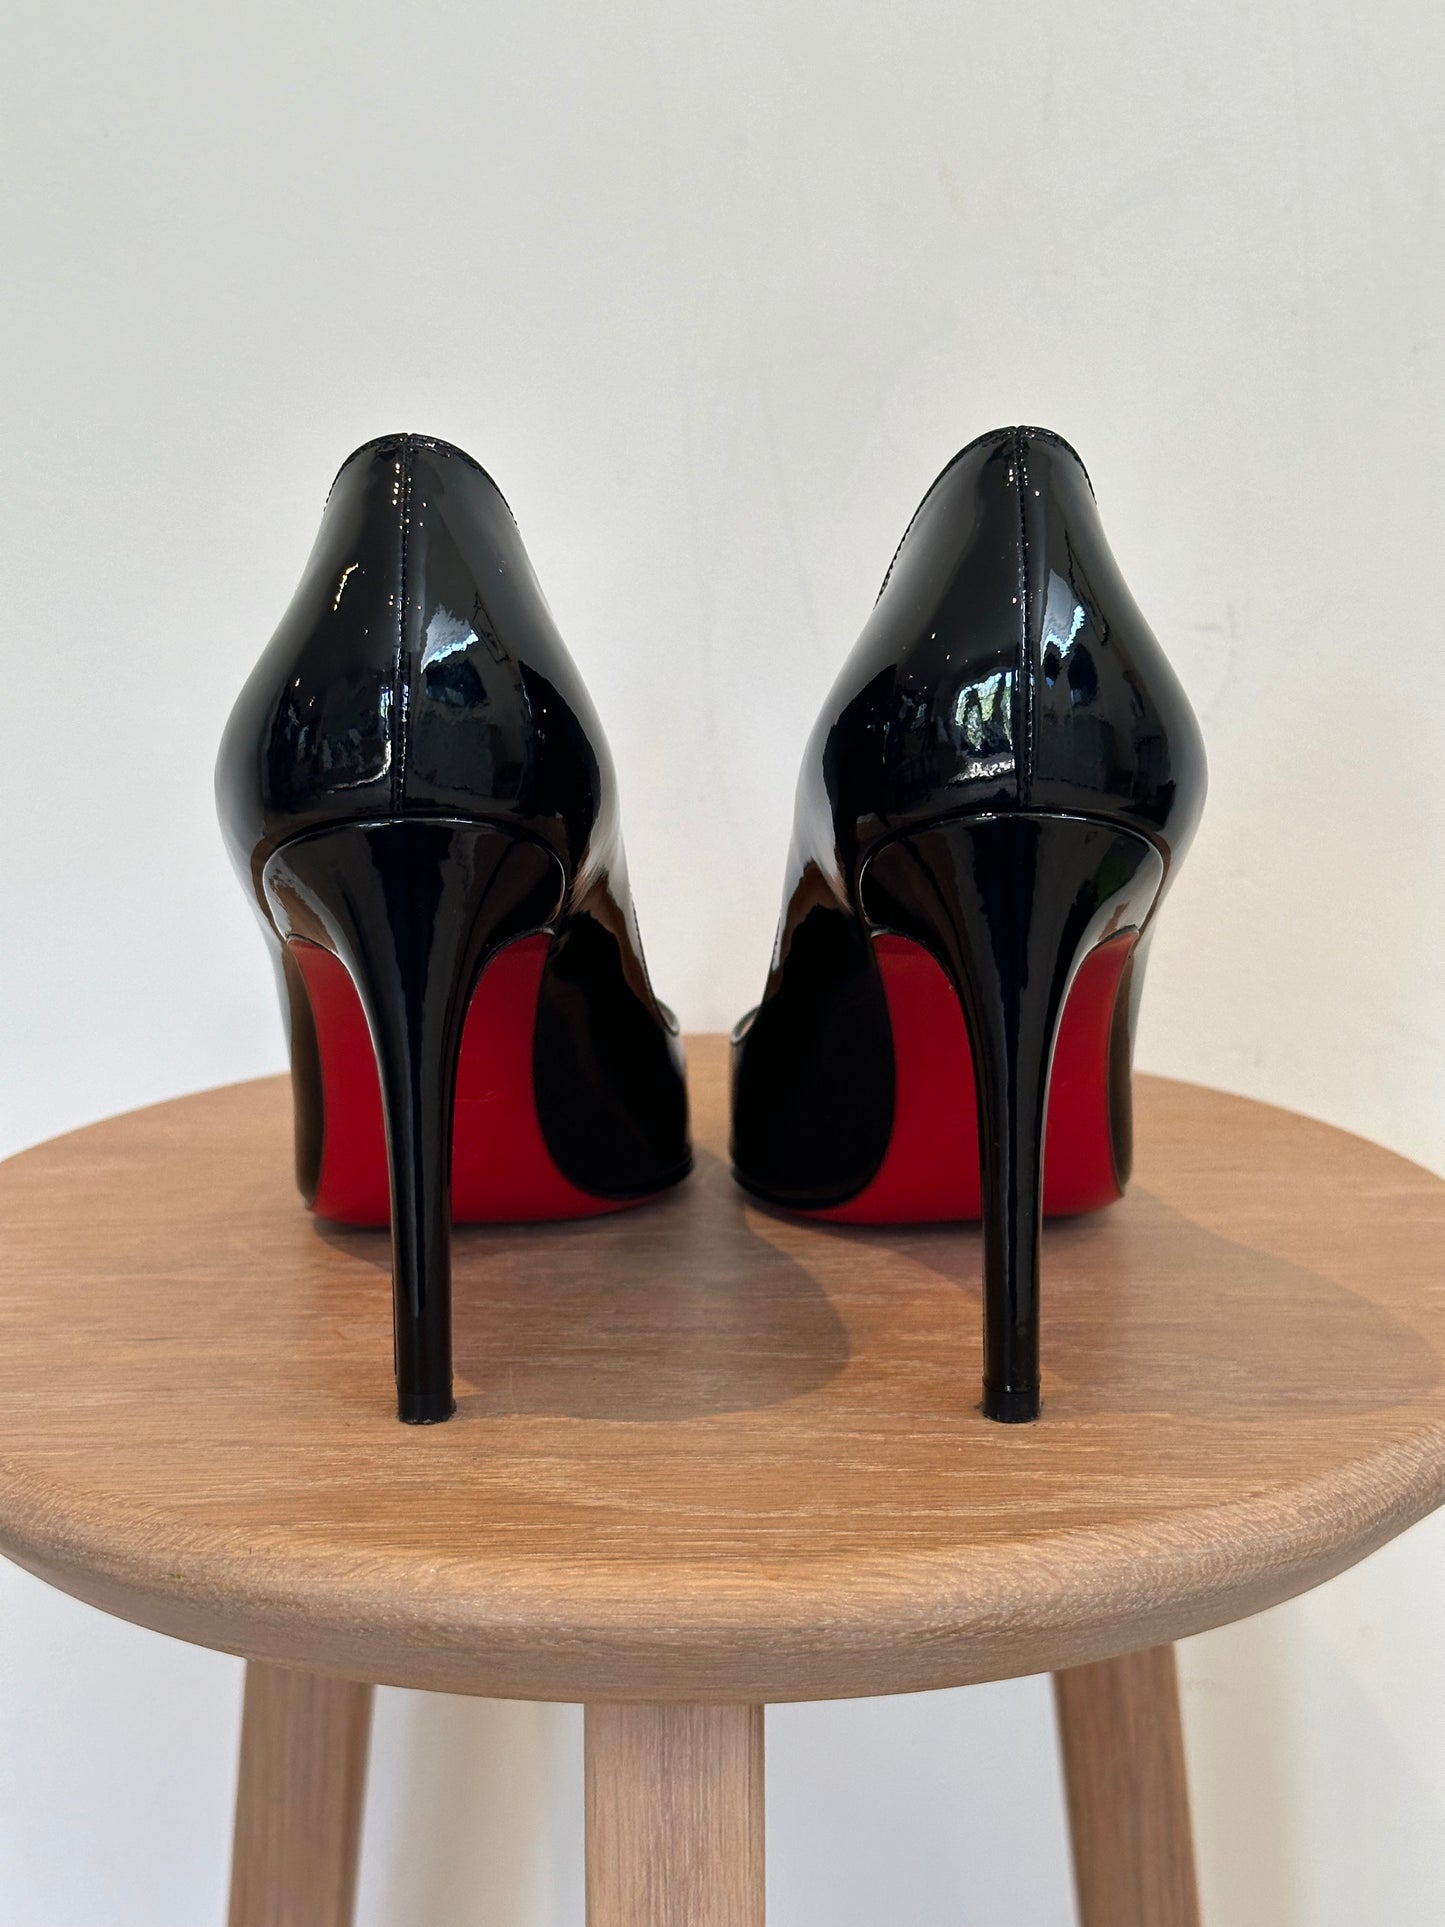 Christian Louboutin Patent Pigalle Shoes - Size 36.5